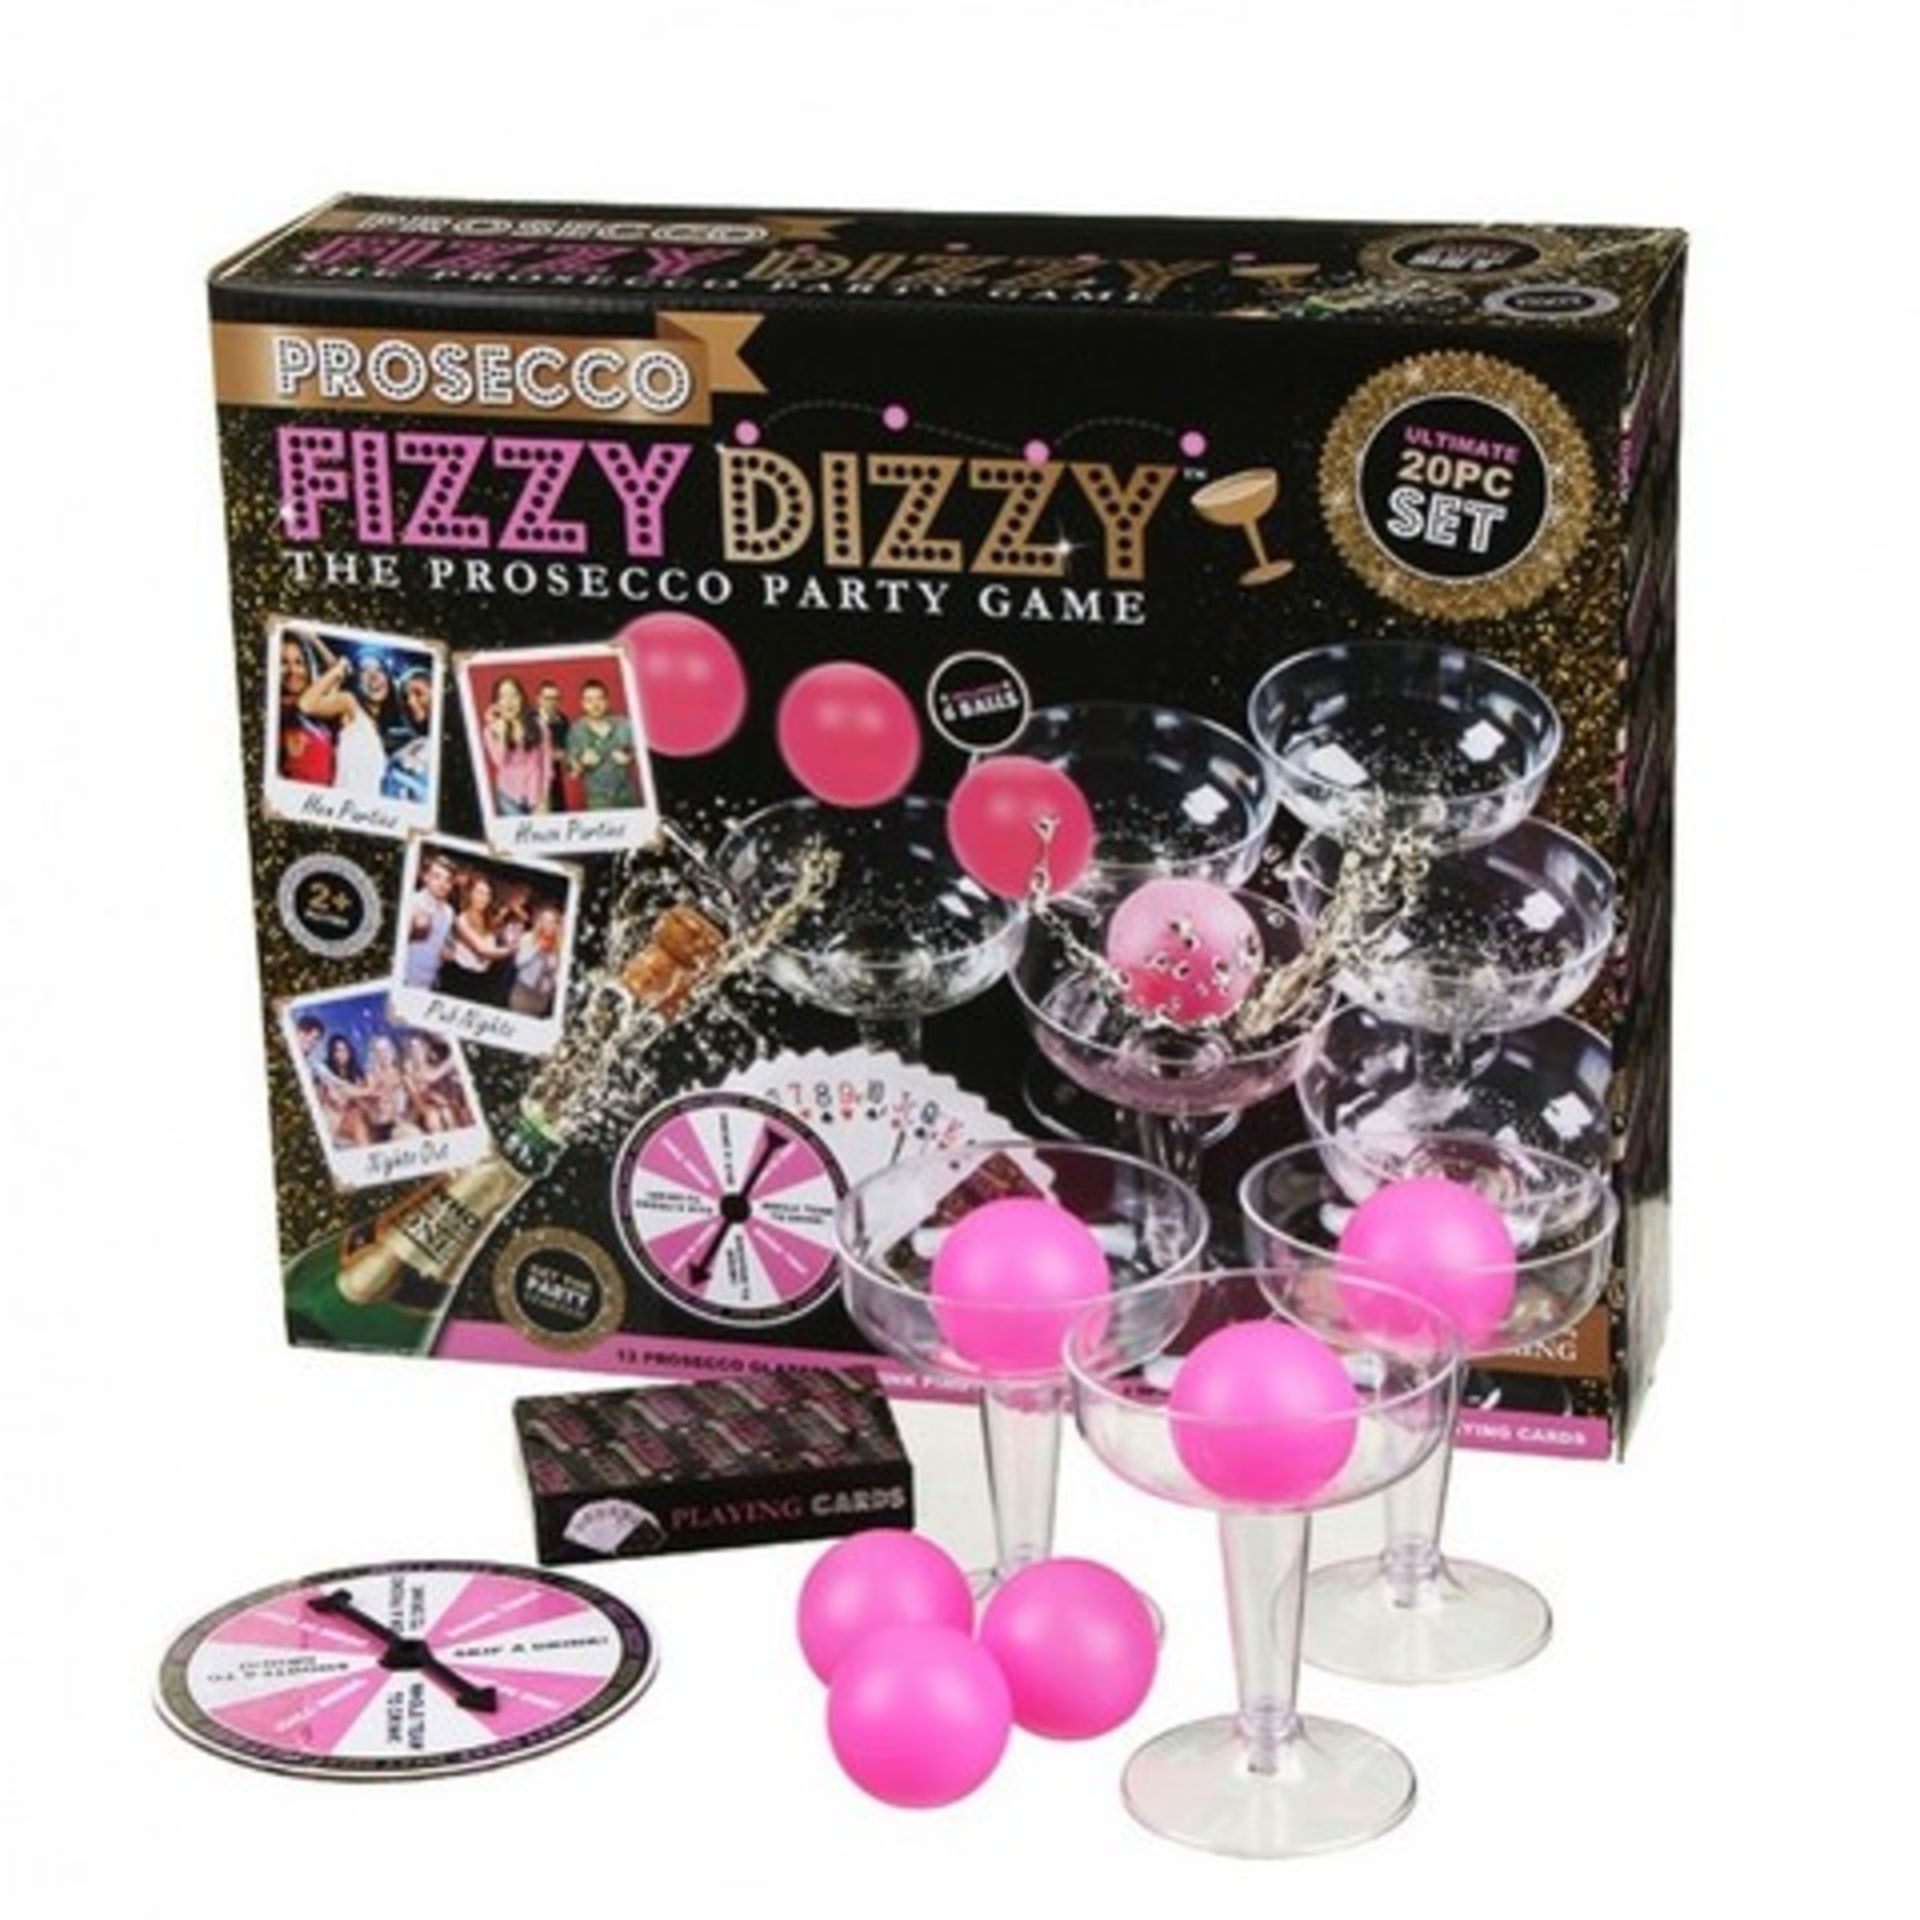 V Brand New Ultimate 20pce Fizzy Dizzy Prosecco Party Game - Includes Prosecco Glasses - Pink Ping